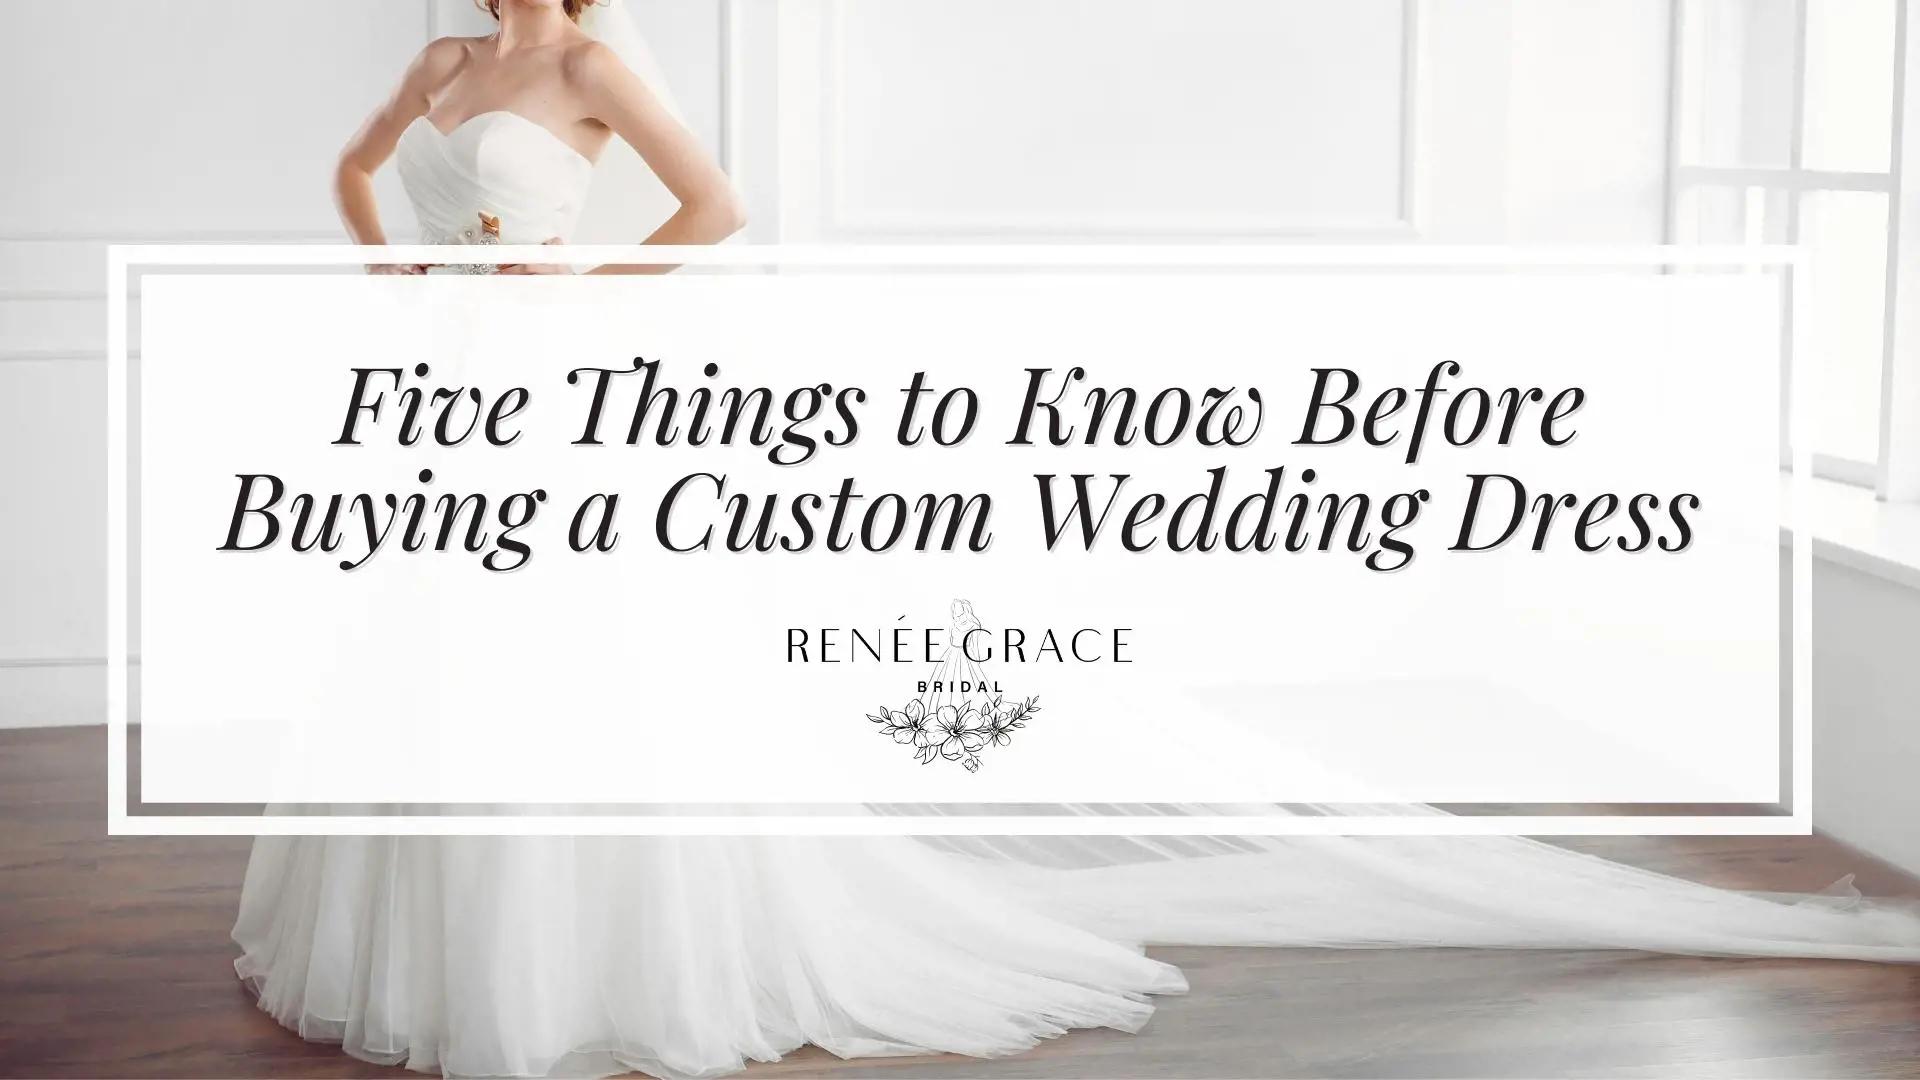 Five Things to Know Before Buying a Custom Wedding Dress